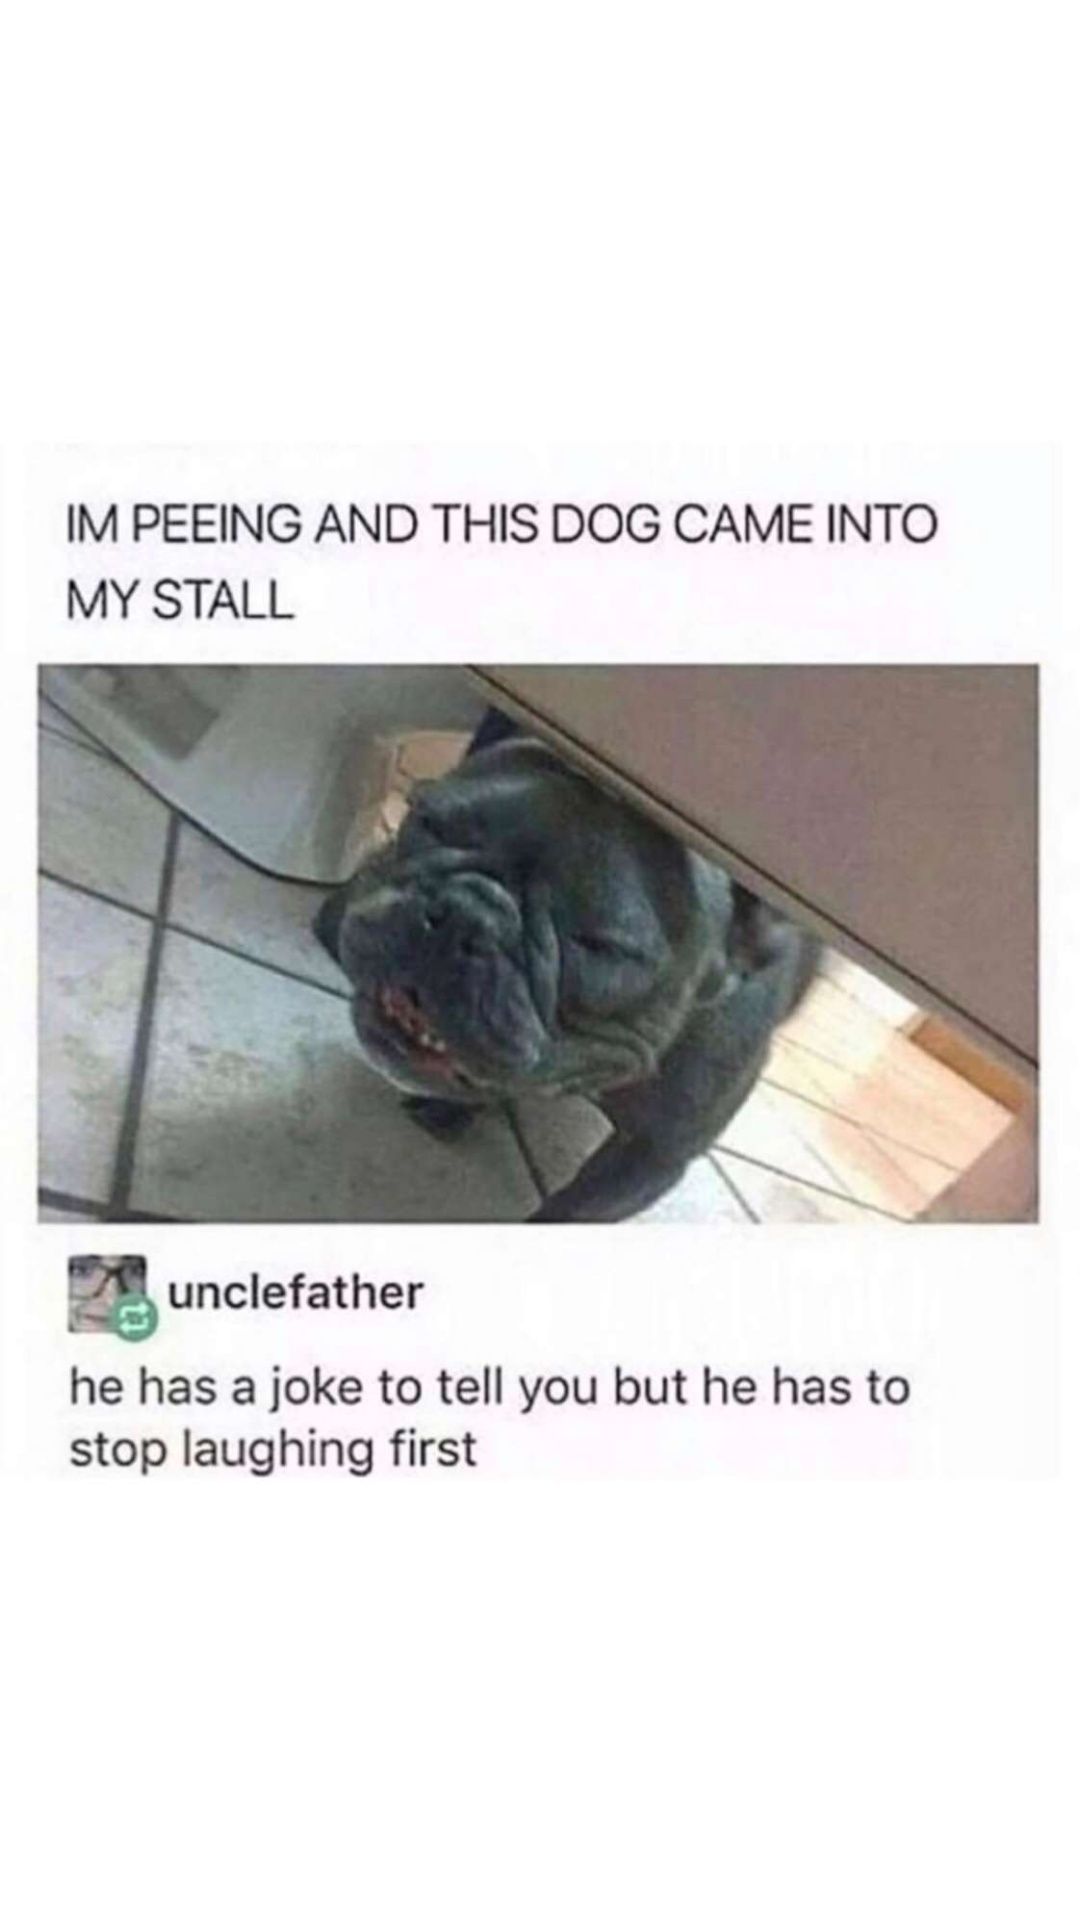 Let the dog laugh oute first